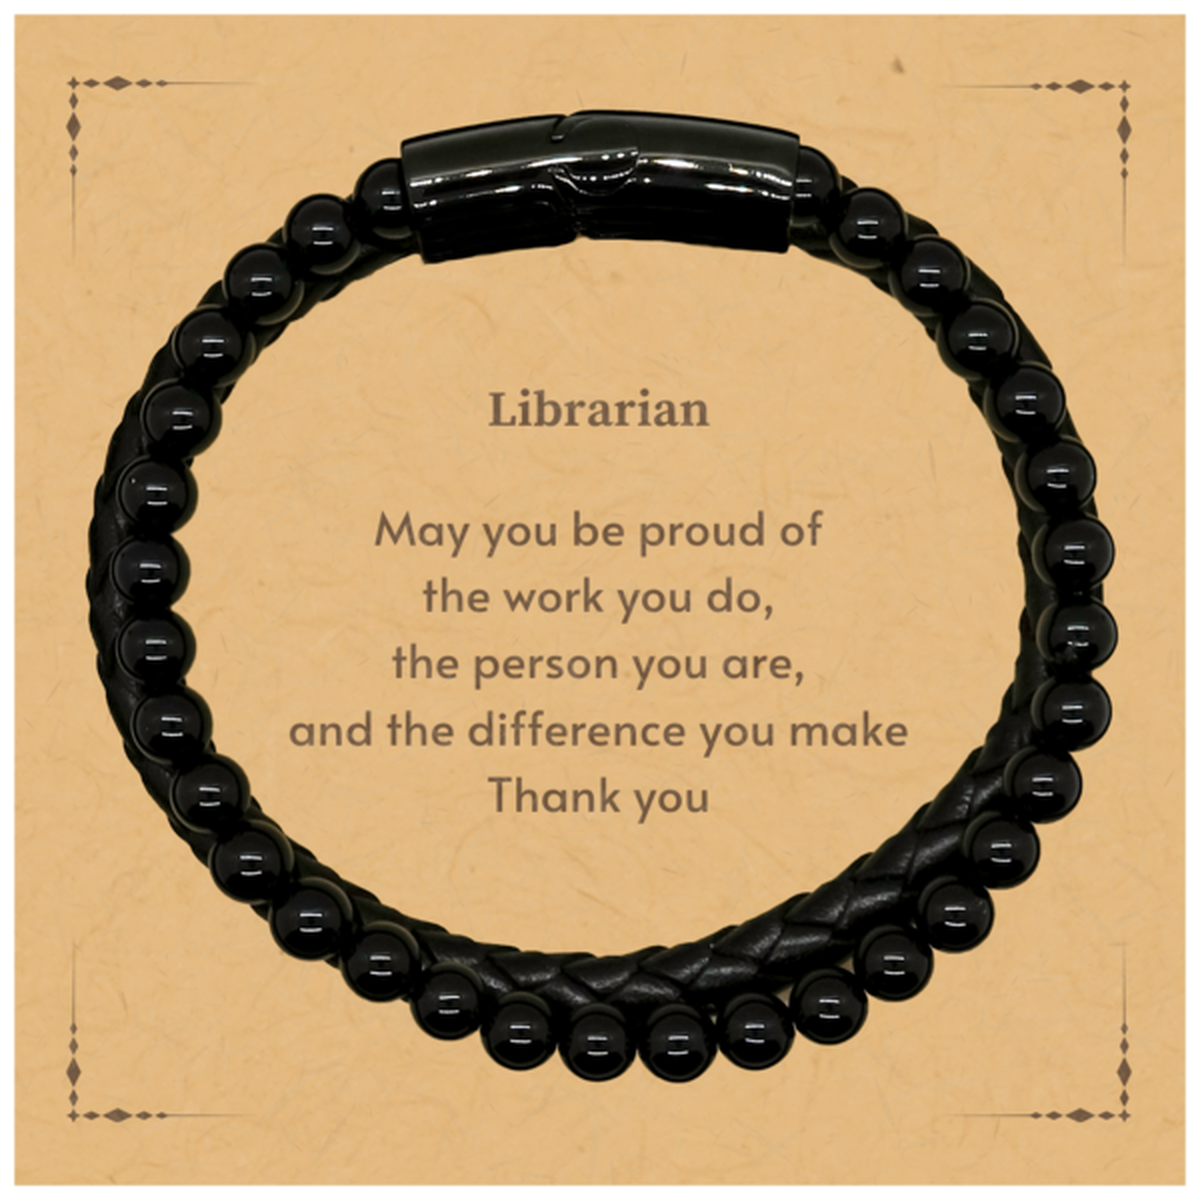 Heartwarming Stone Leather Bracelets Retirement Coworkers Gifts for Librarian, Librarian May You be proud of the work you do, the person you are Gifts for Boss Men Women Friends